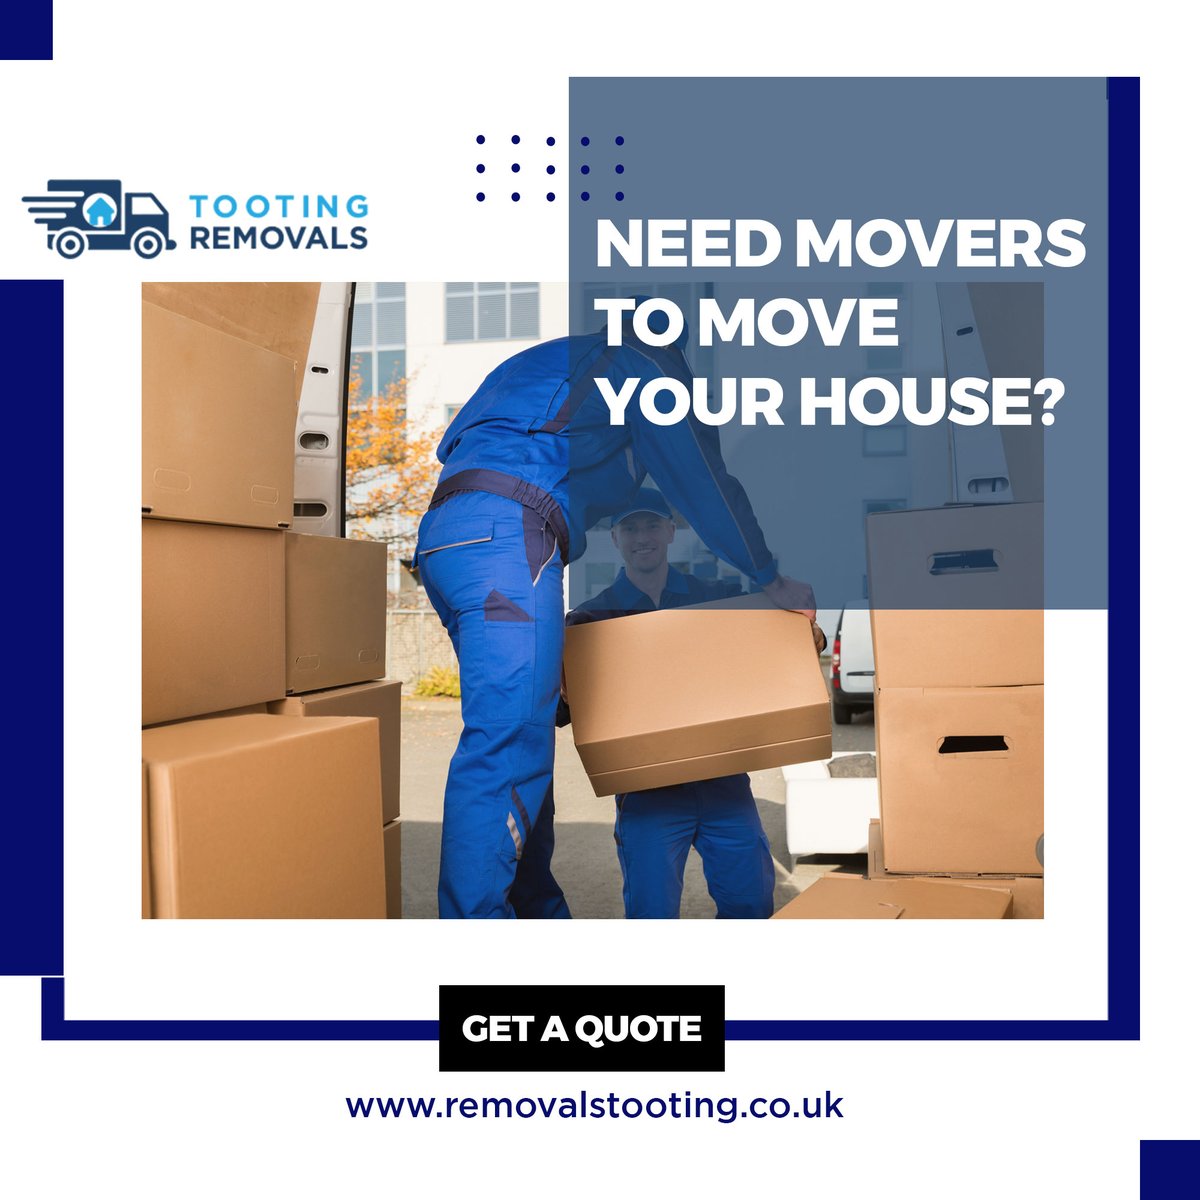 Made your Moving Stress-free with us!
For details or  a quote, call us: 020 3642 8567
visit us: tootingremovals.co.uk
.
#officeremovalservice #packaging #houseremovals #furnitureremoval #OfficeRemovals #officefurniture #tooting #tootingremovals #commercialremovals #manwithavan